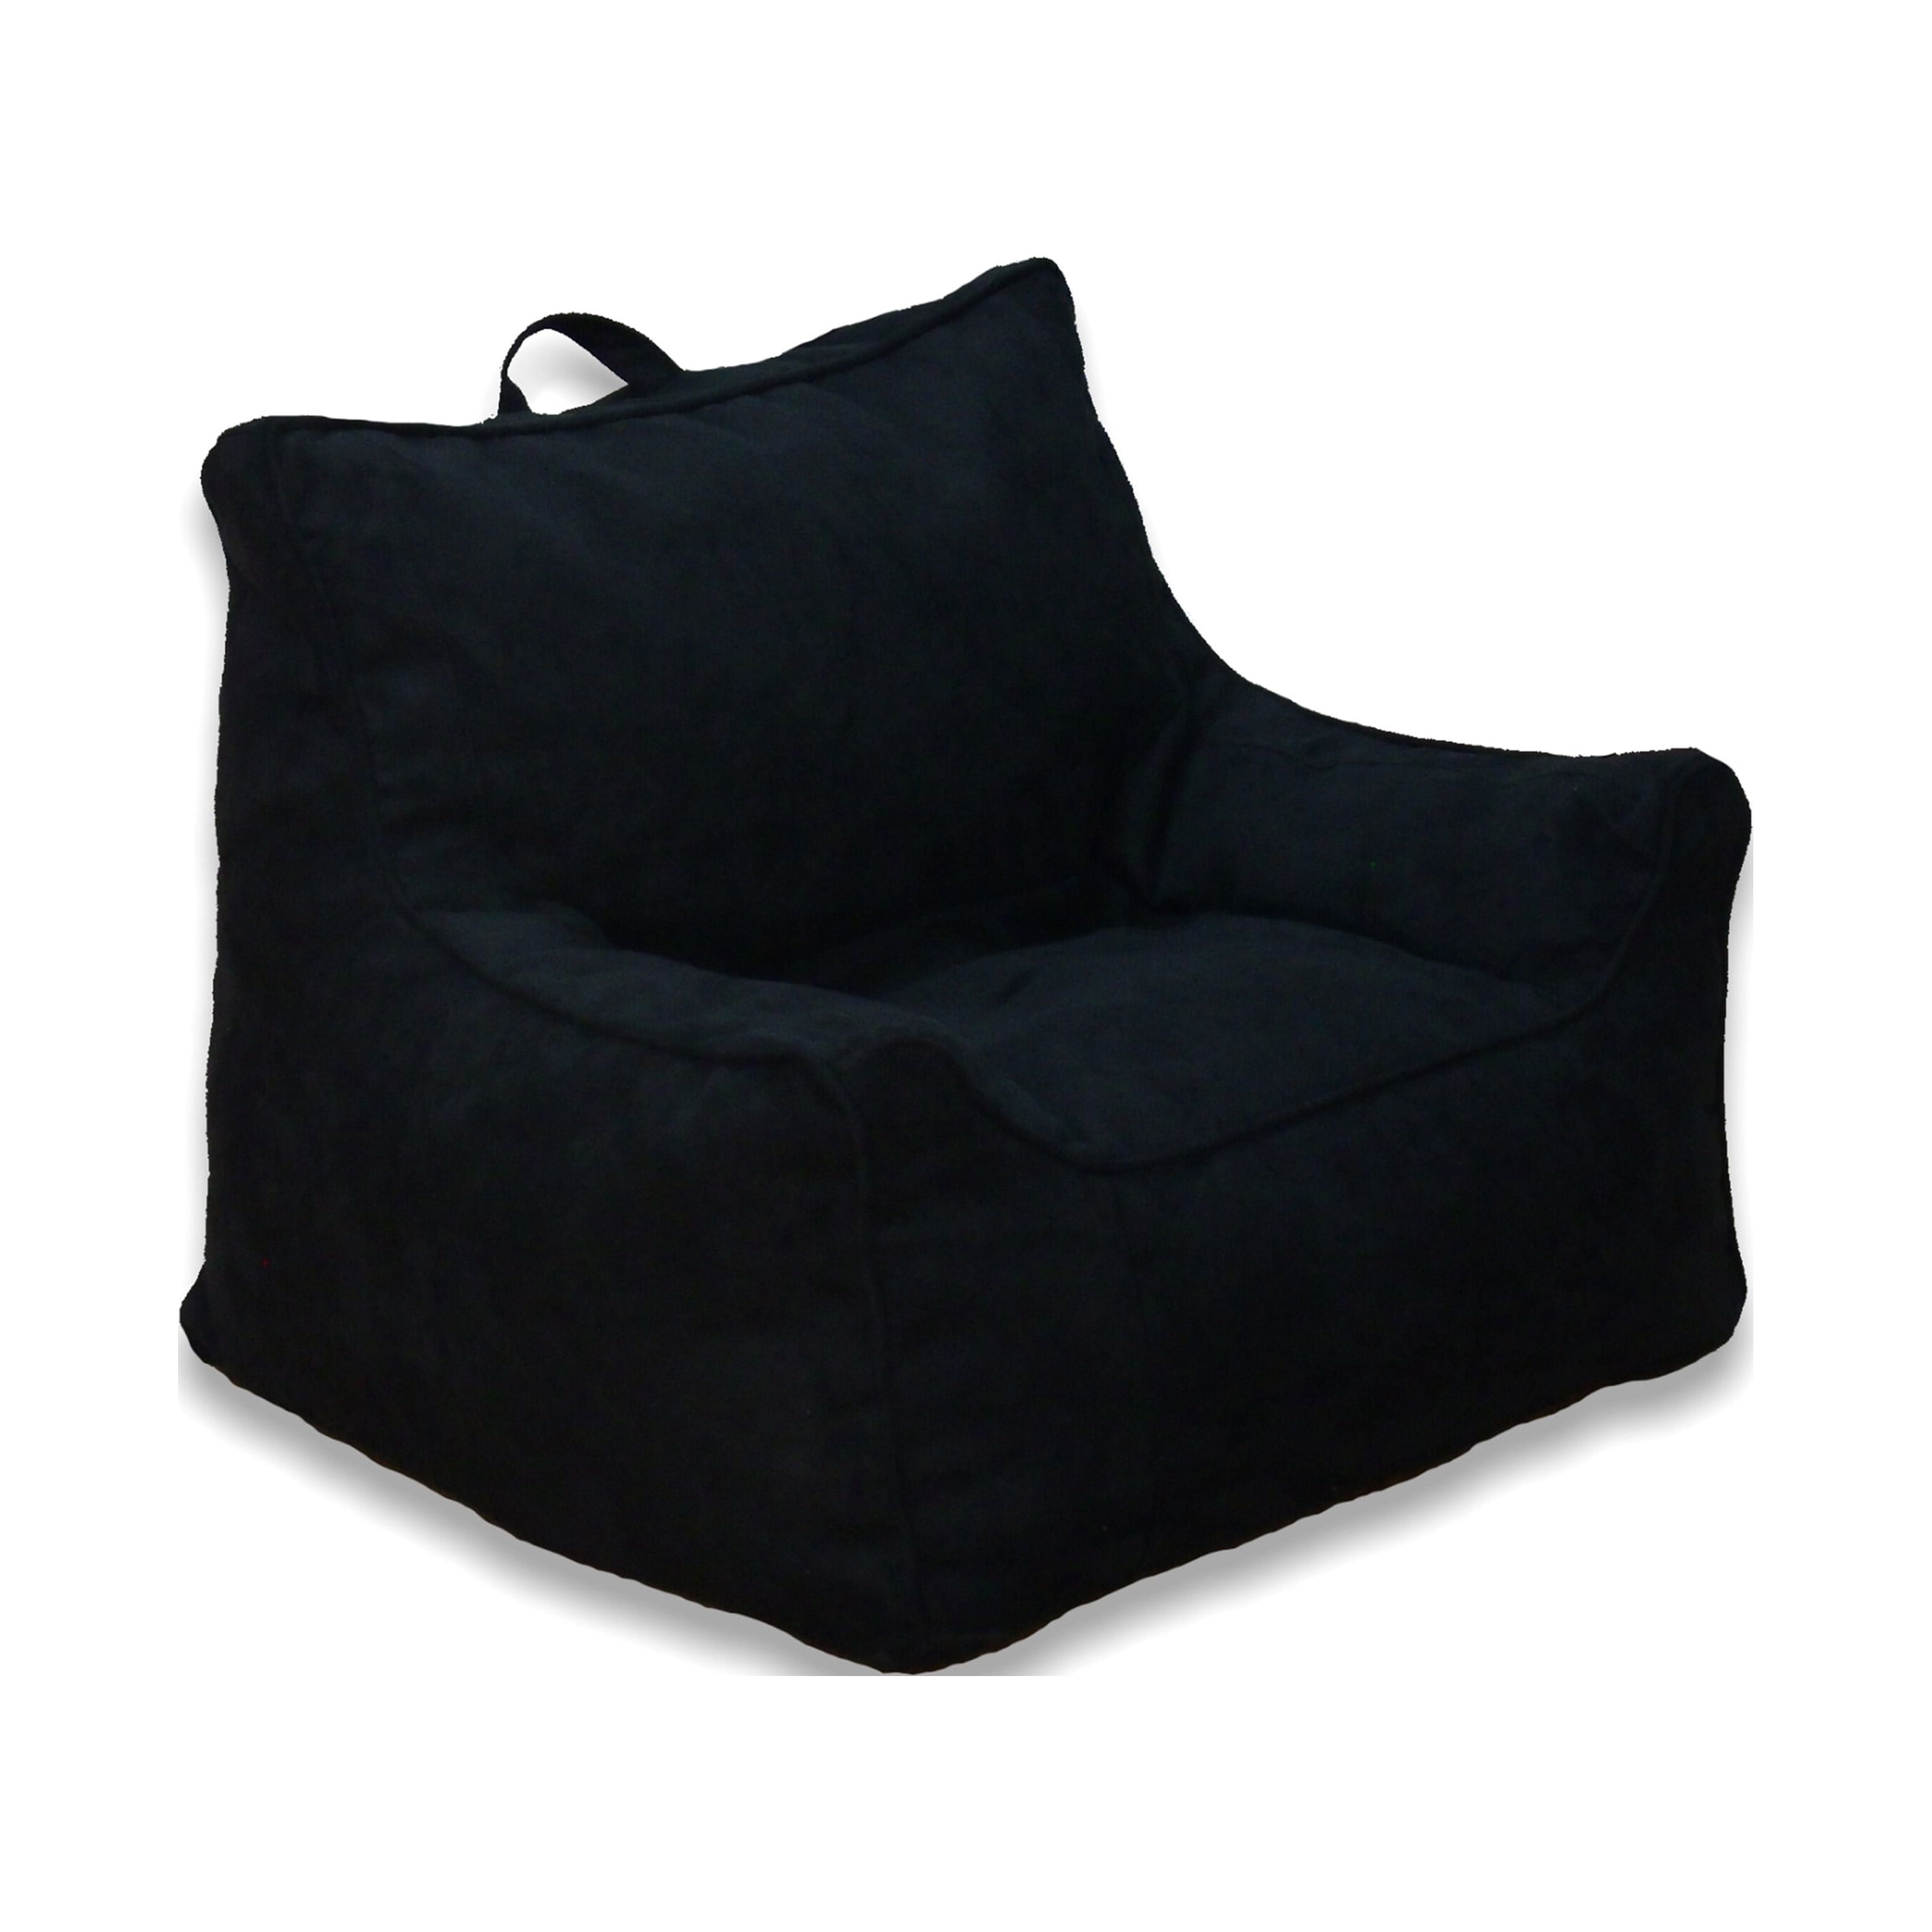 Lumaland 7ft Giant Bean Bag Chair with Microsuede Washable Cover, Dark Gray  